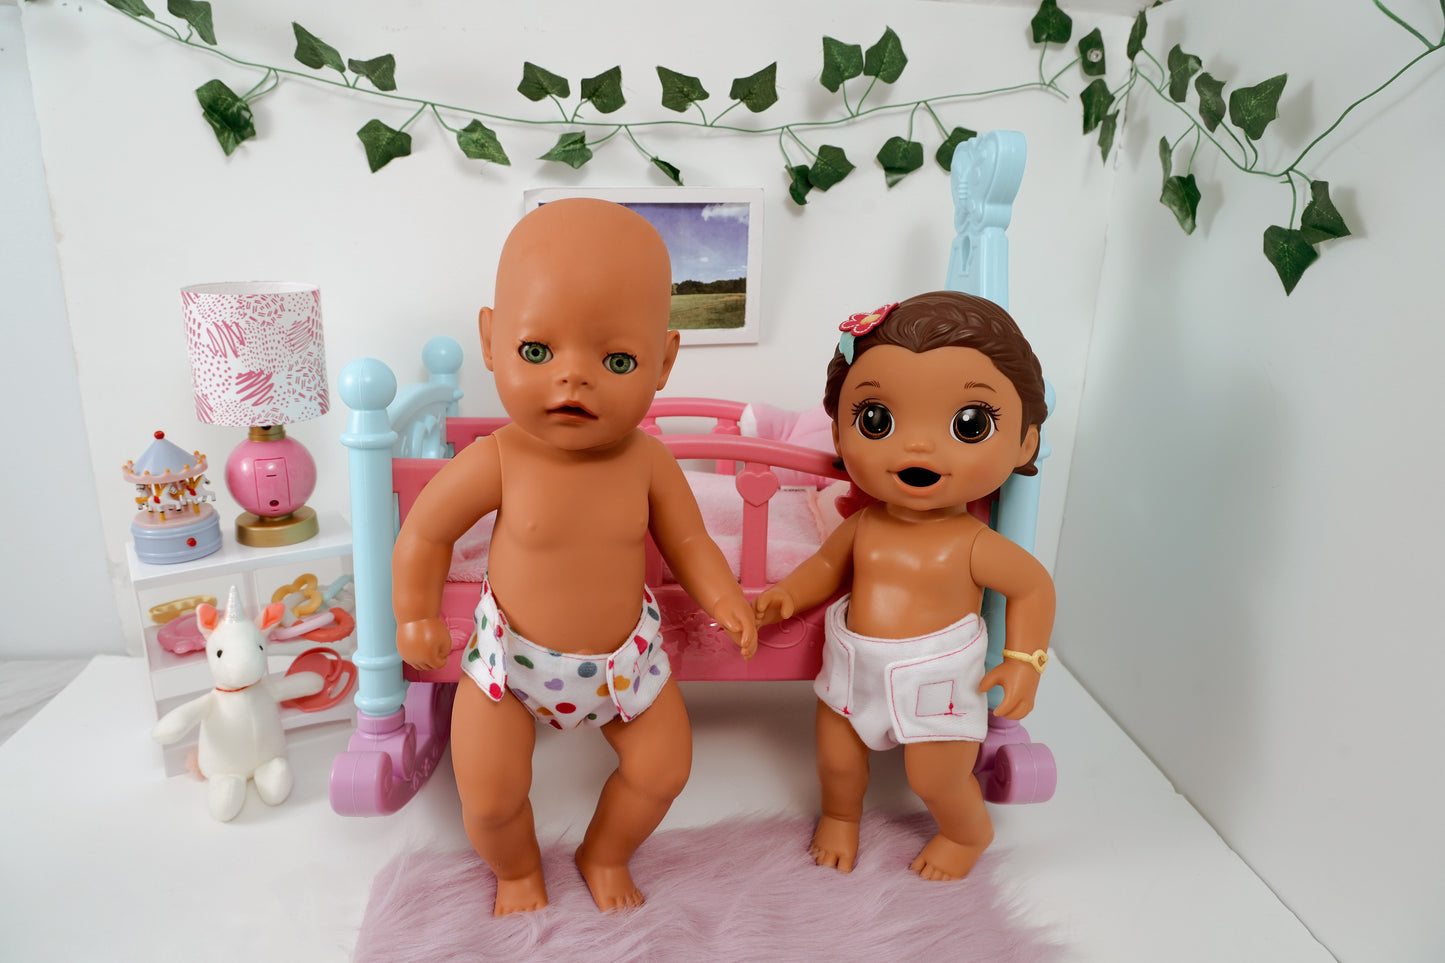 Reusable Baby Doll Cloth Diaper Set, fits 12-14 inch Dolls